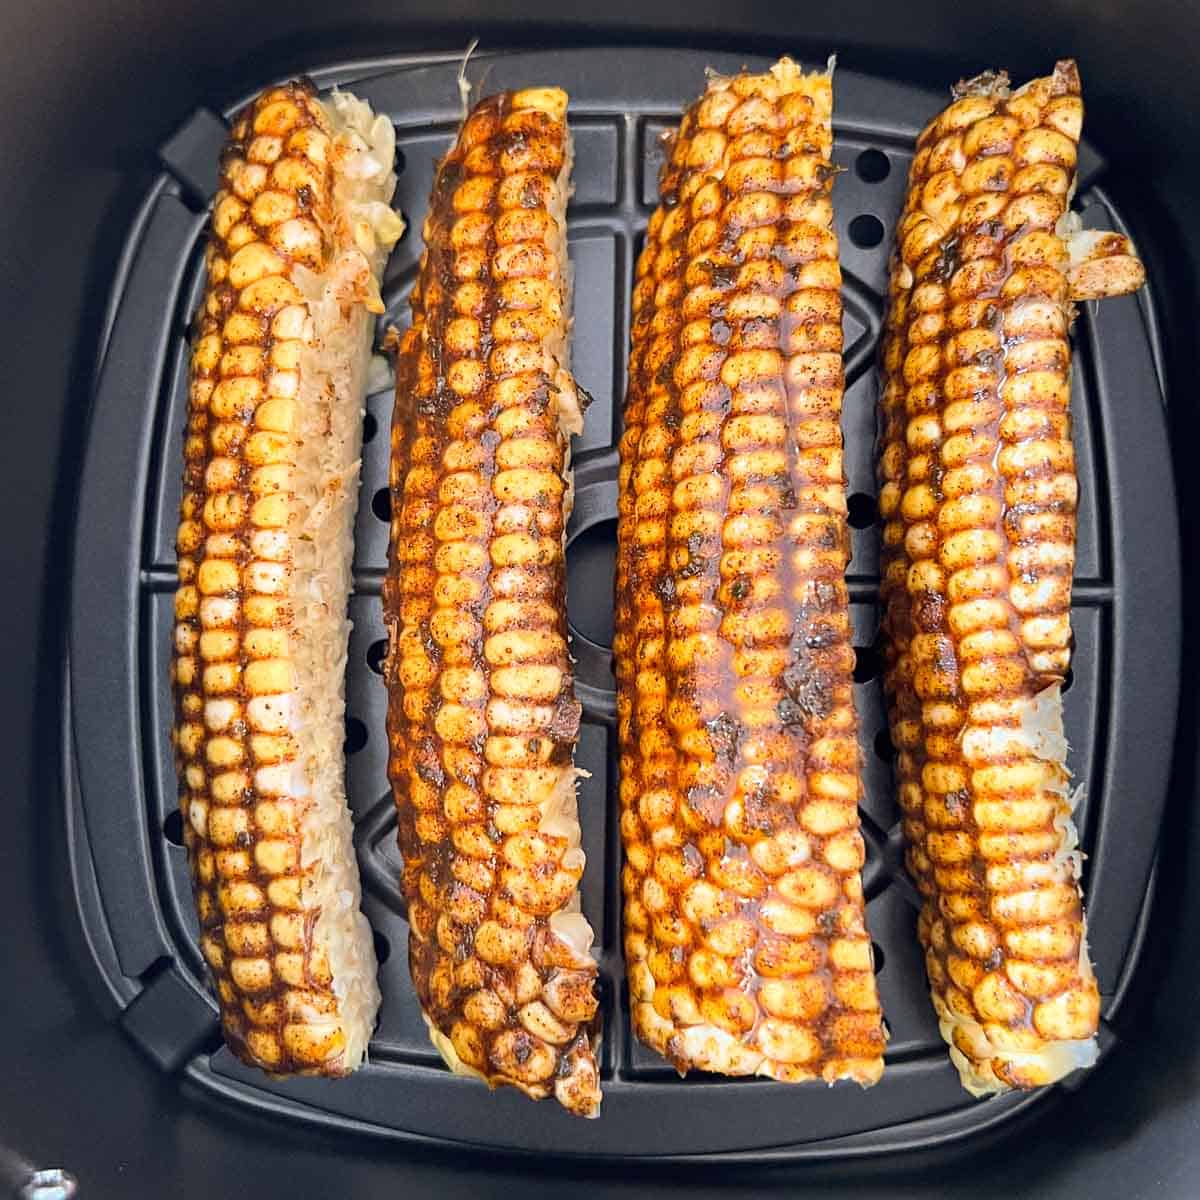 corn ribs in air fryer before cooking